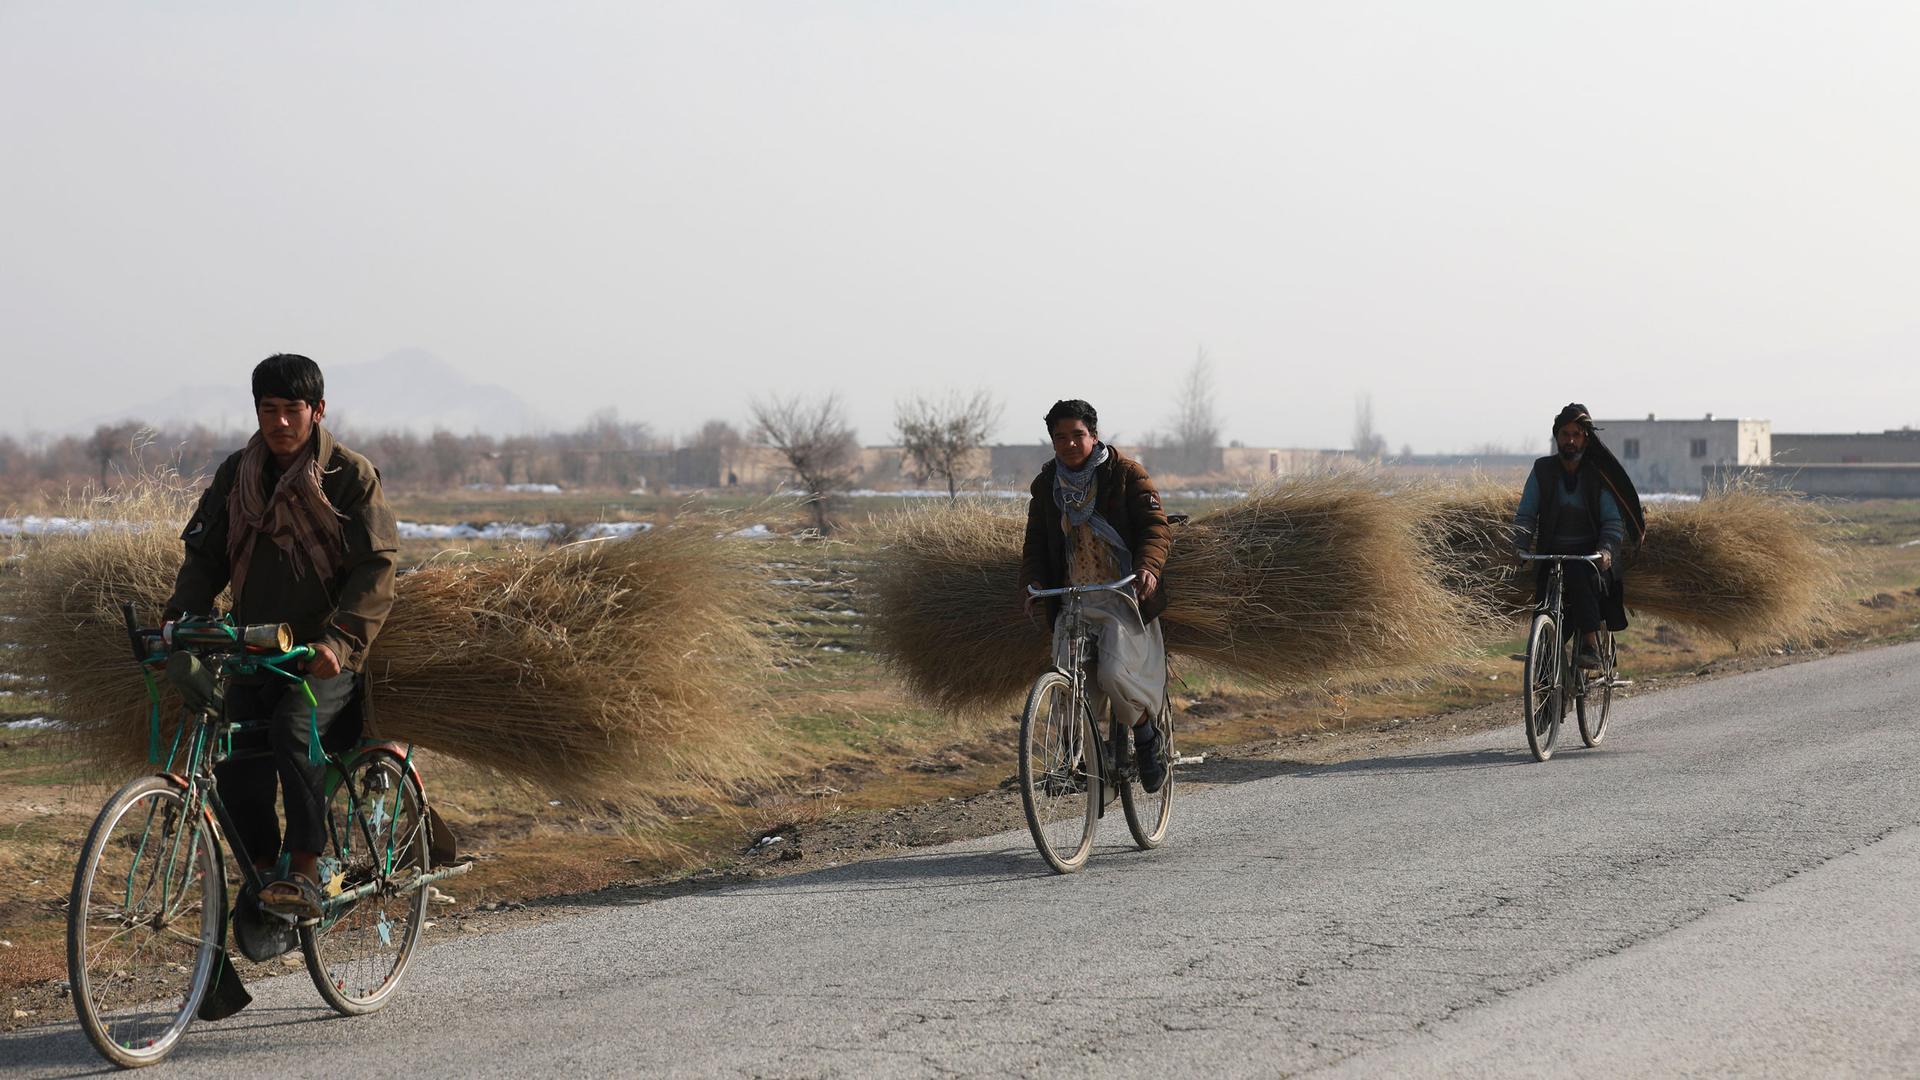 Three people are shown riding bicycles along a road carrying large bundles of harvested shrubs on the back of their bikes.